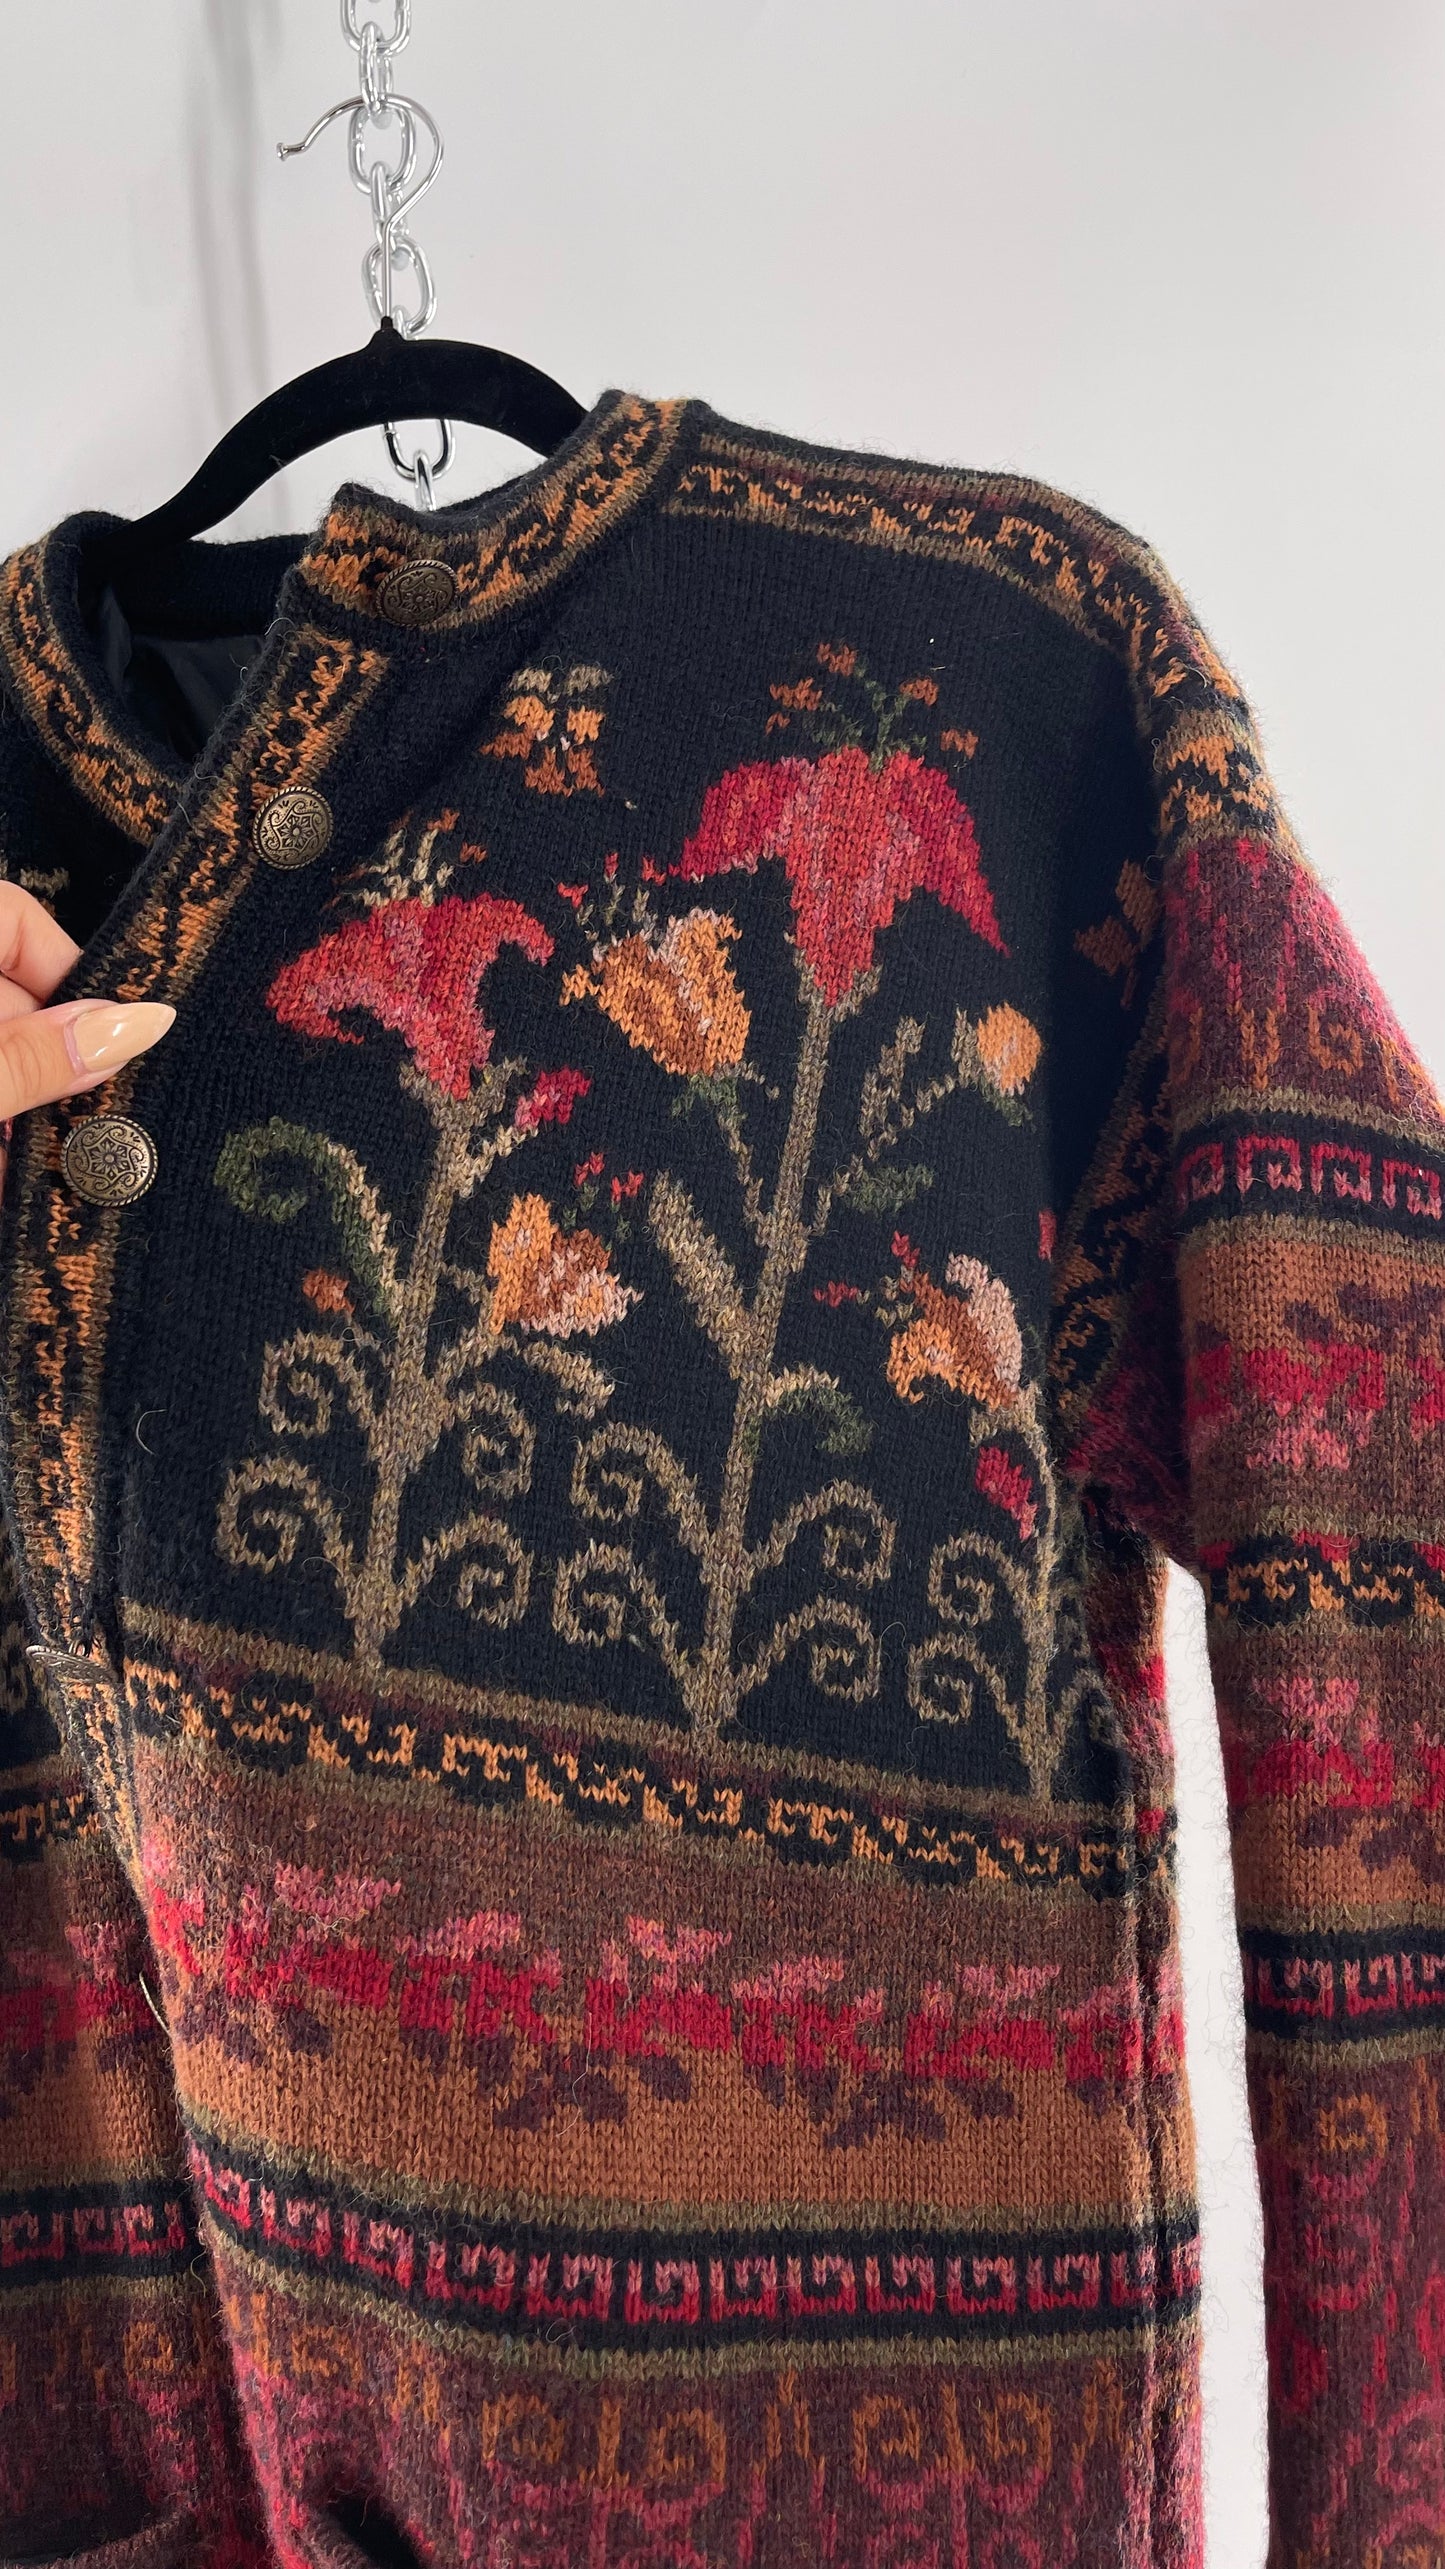 Vintage Iceland Design Wool Jacket with Brass Embossed Buttons and Folk Floral Patterning(C)(Medium)